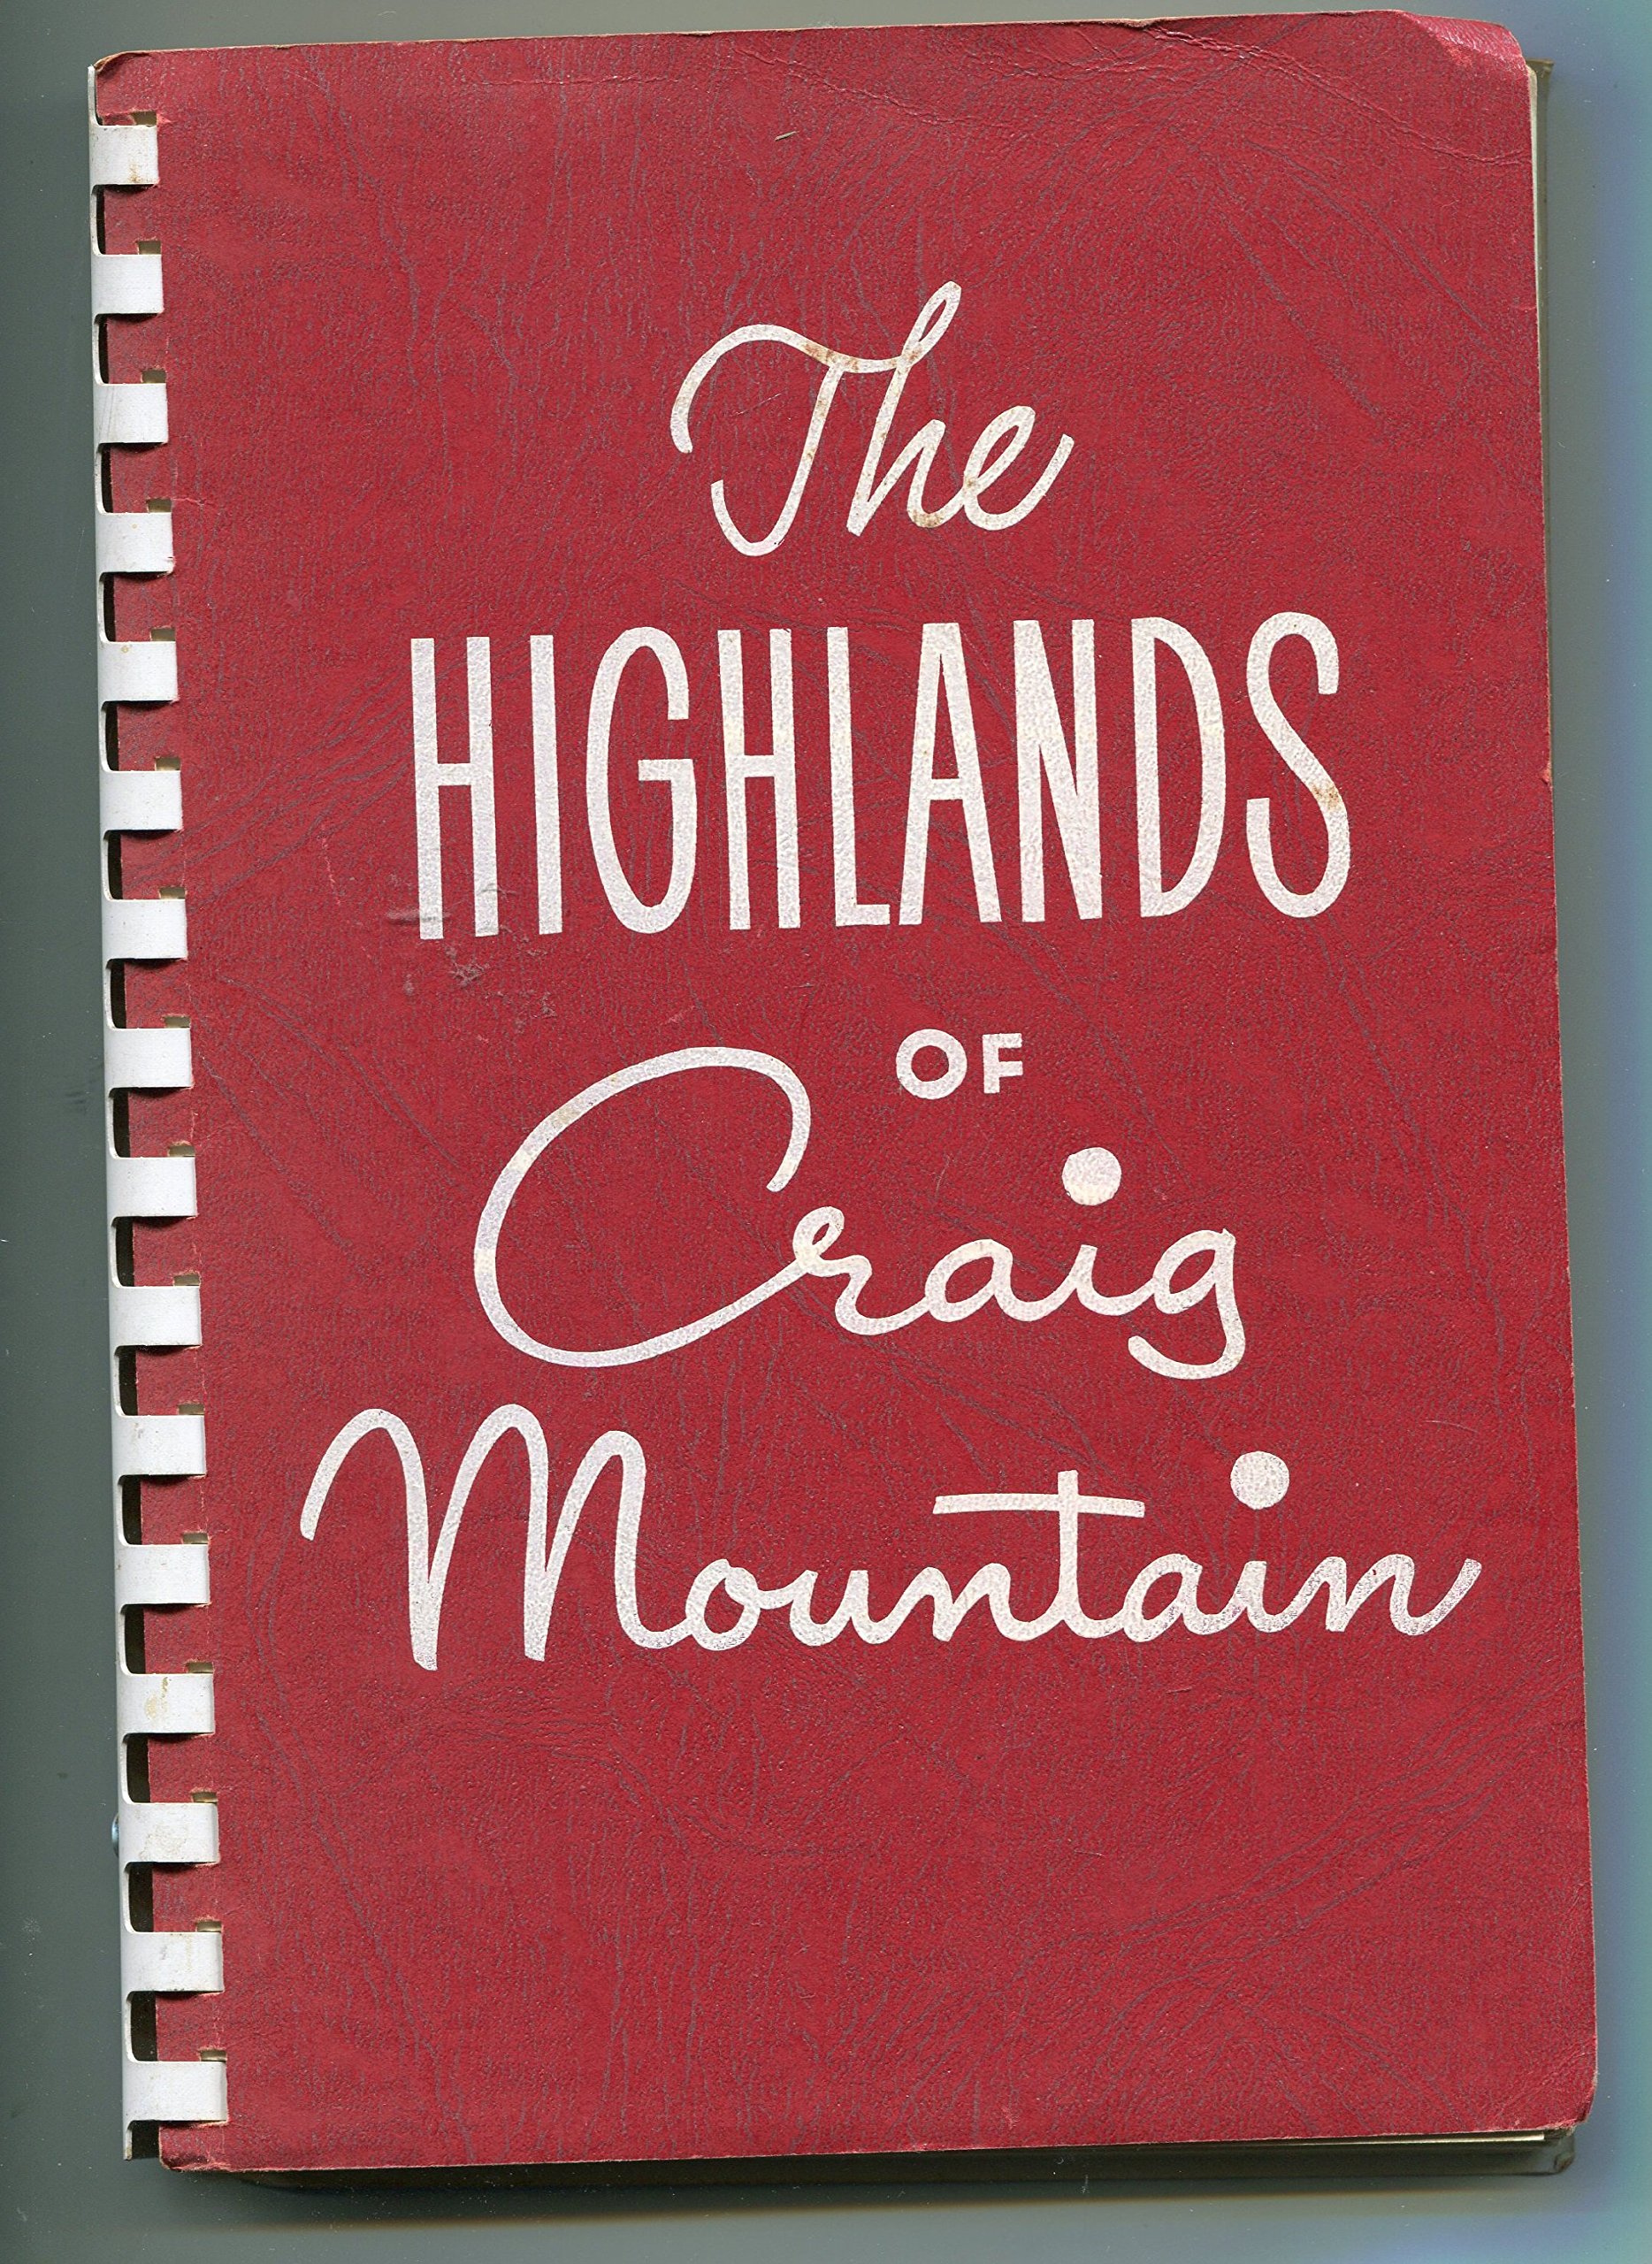 The Highlands of Craig Mountain (book cover)